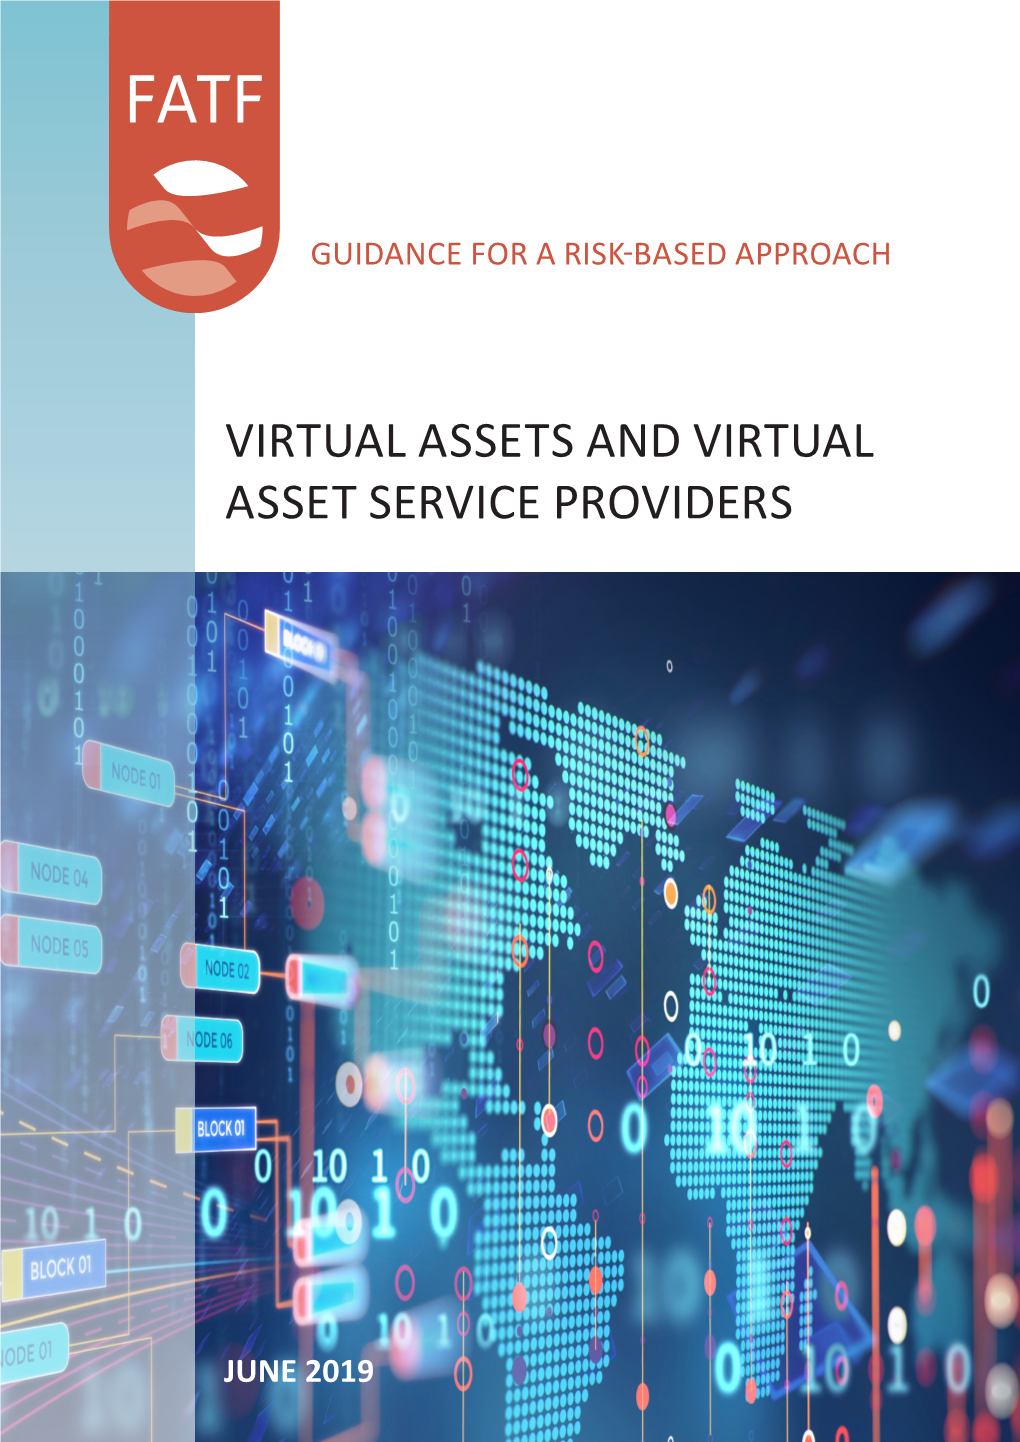 Guidance for a Risk-Based Approach to Virtual